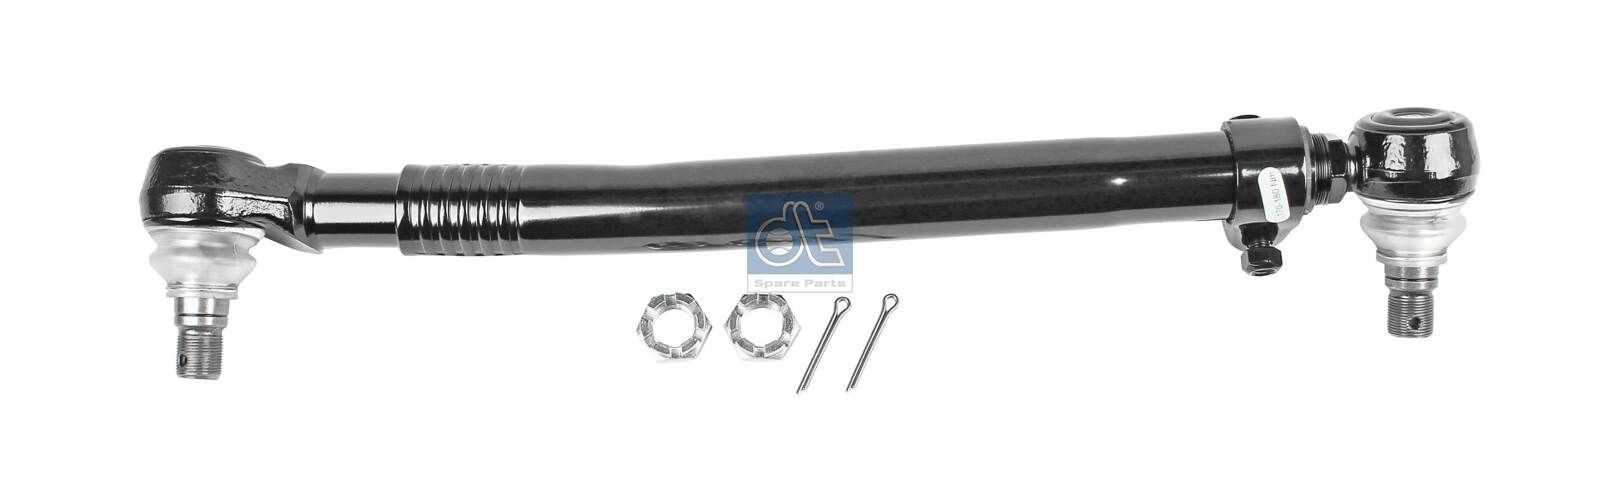 DT Spare Parts 1.19385 Rod Assembly 1 895 861